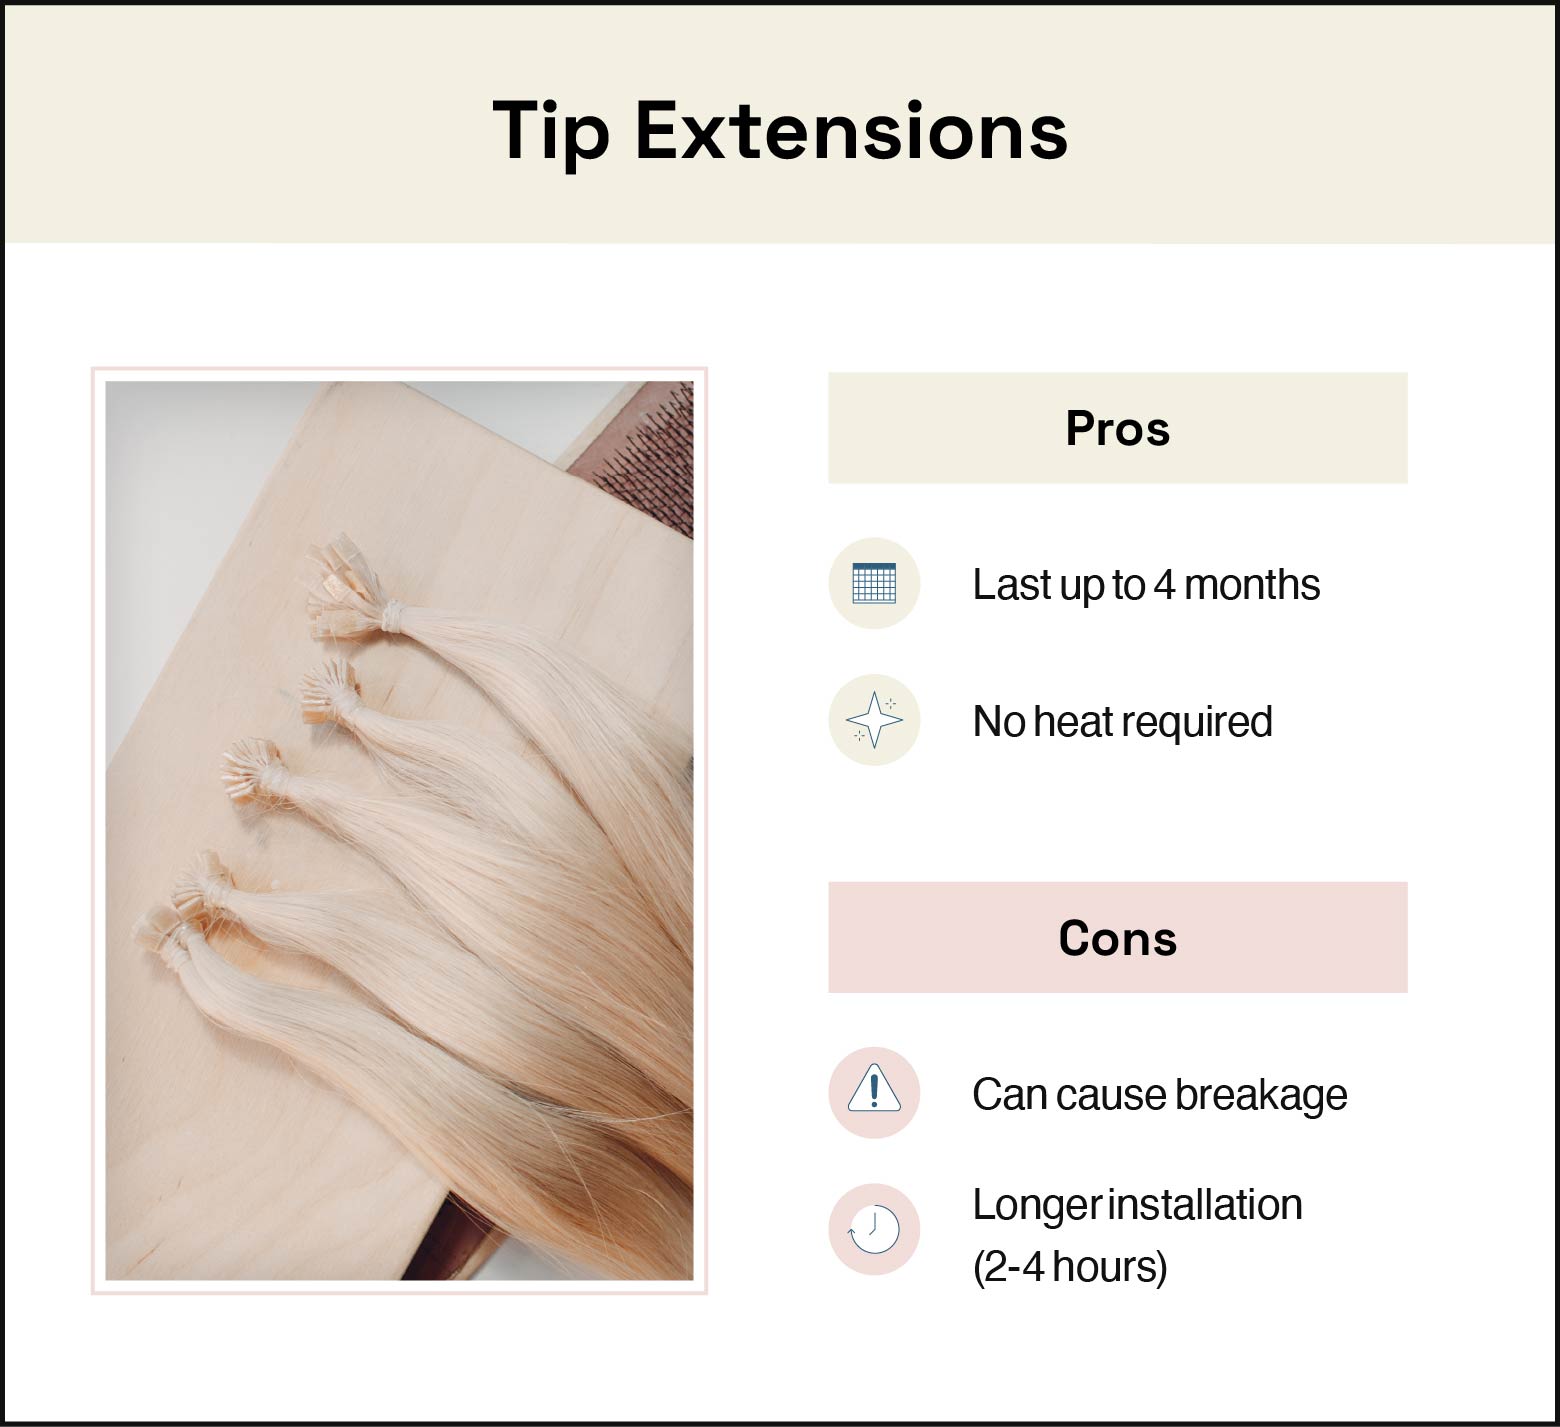 photo of blonde tip extensions on the left and list of pros and cons on the right